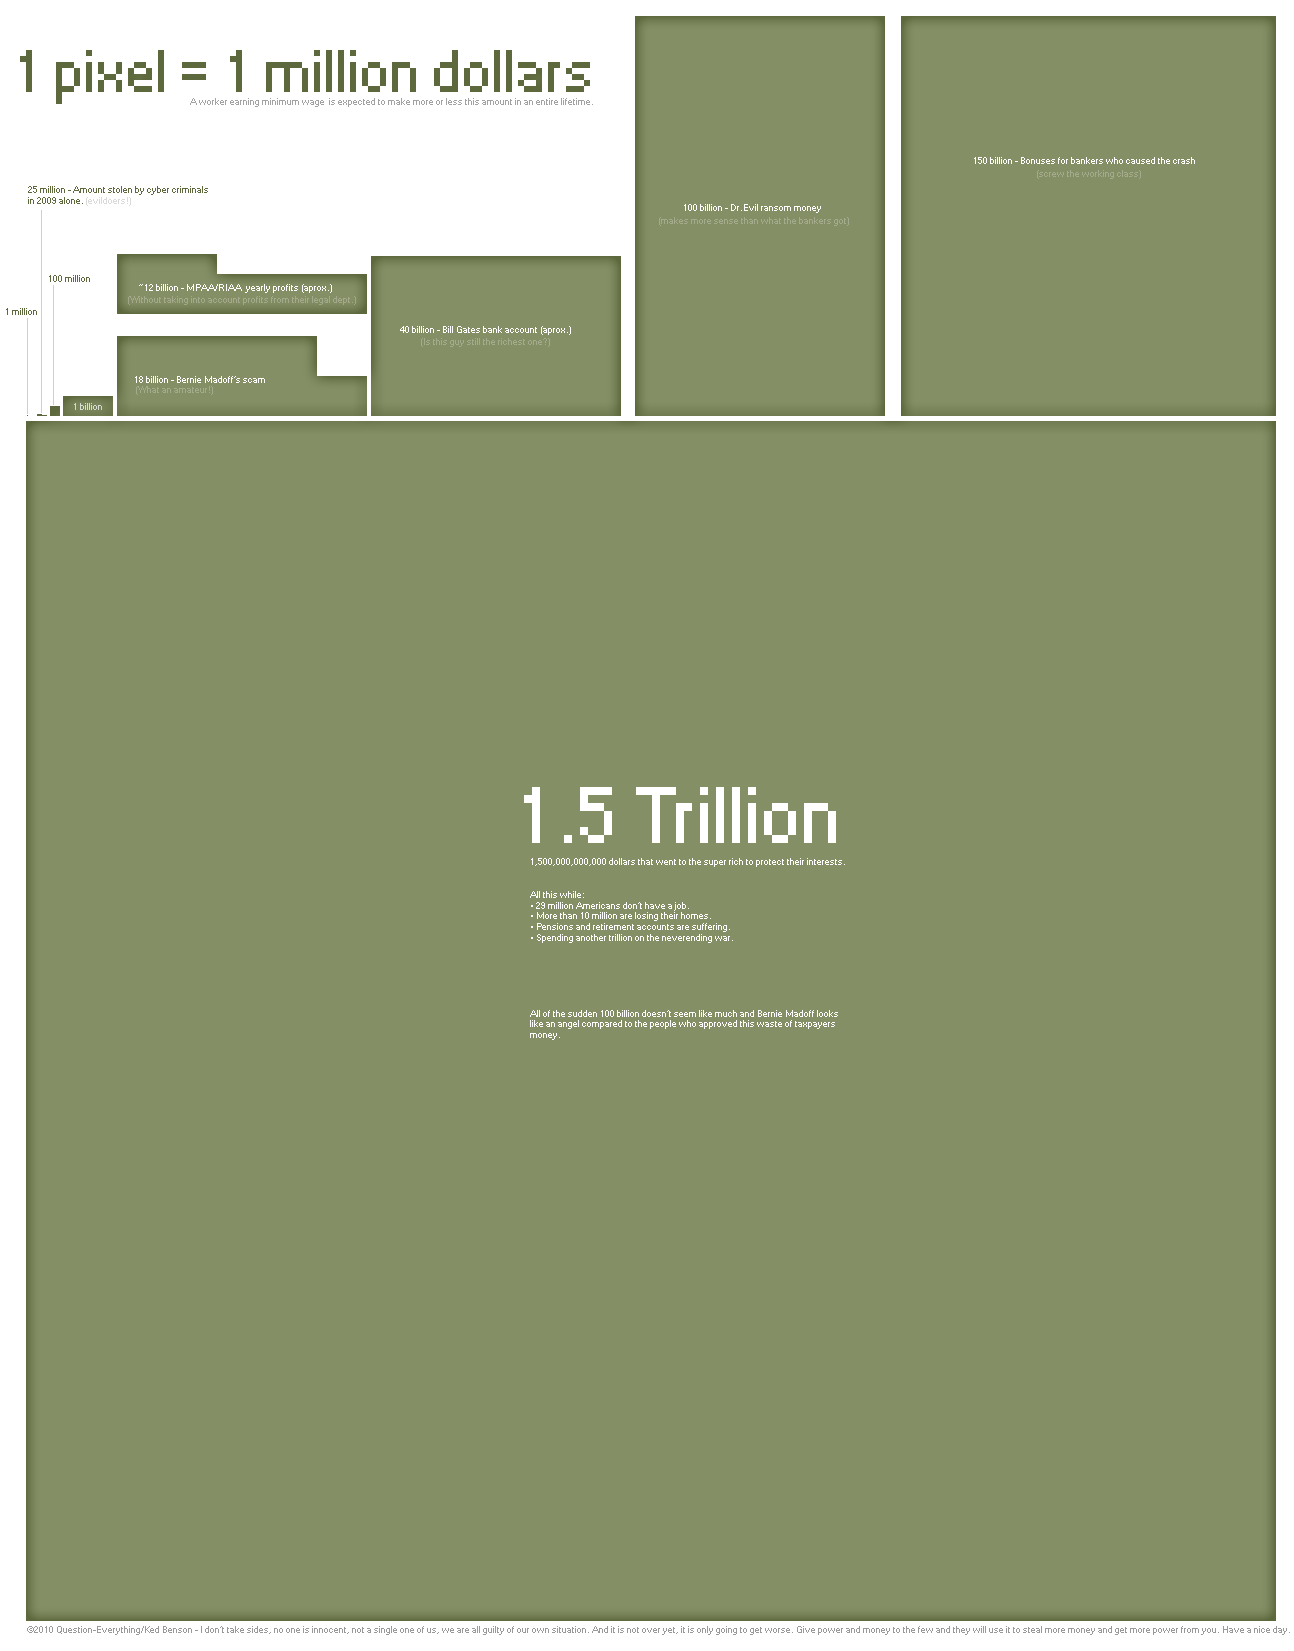 A Pixel's Worth a Million Dollars Infographic